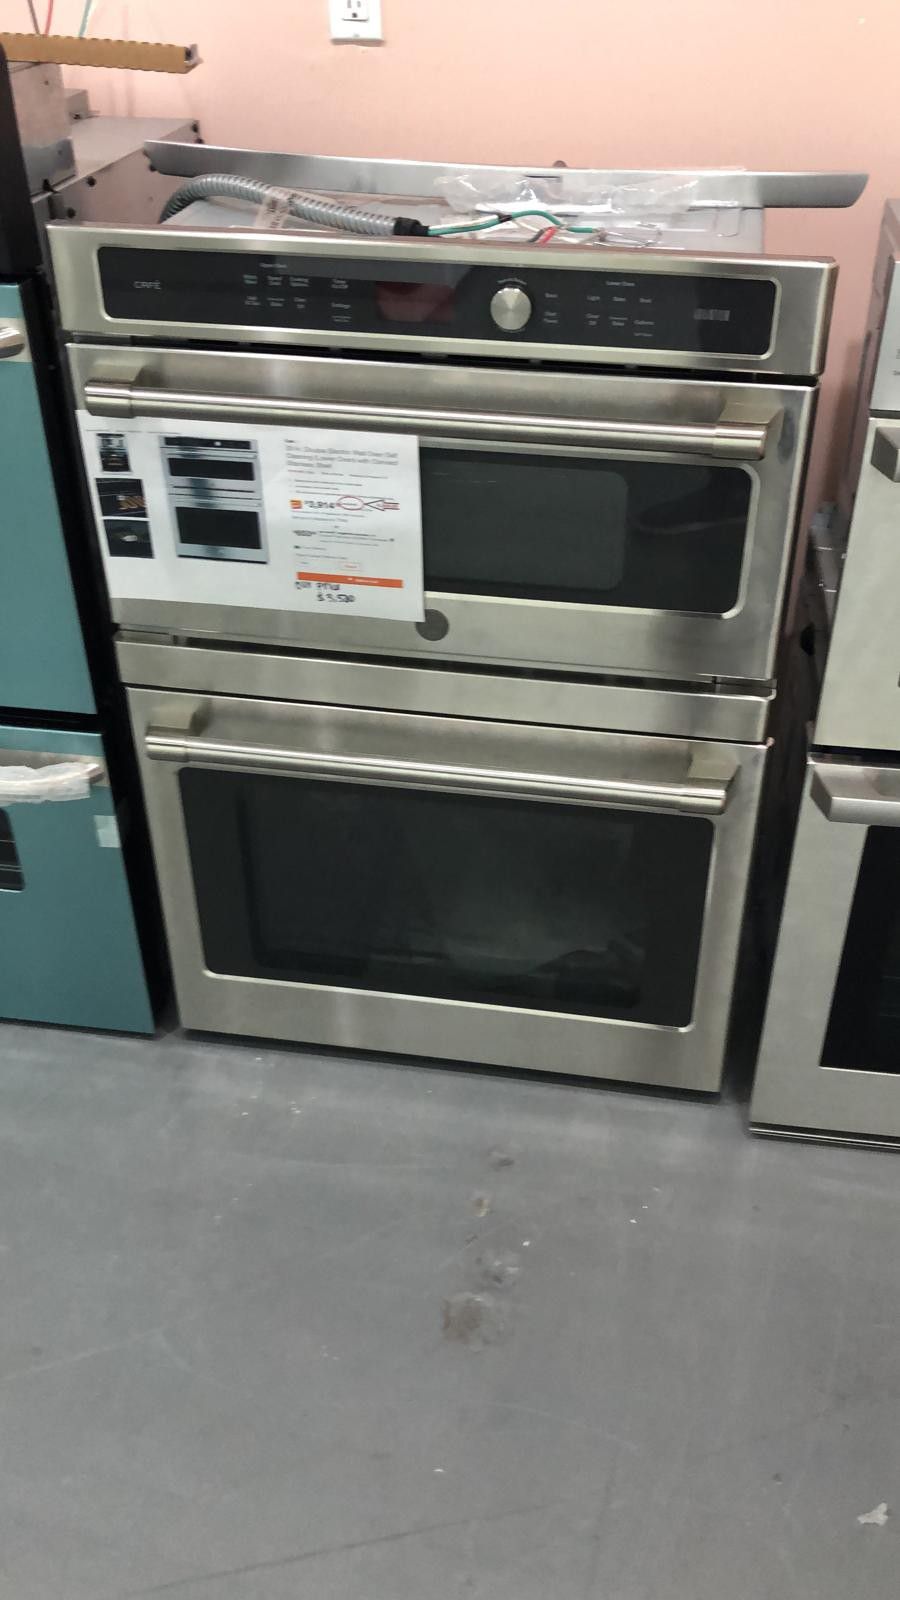 New GE CAFE 30" Built-in Microwave Combination Wall Oven, TrueConvection, Self-Clean, Glass Touch Controls - Stainless Steel 🔥 ONLY 39$ Down 🚚